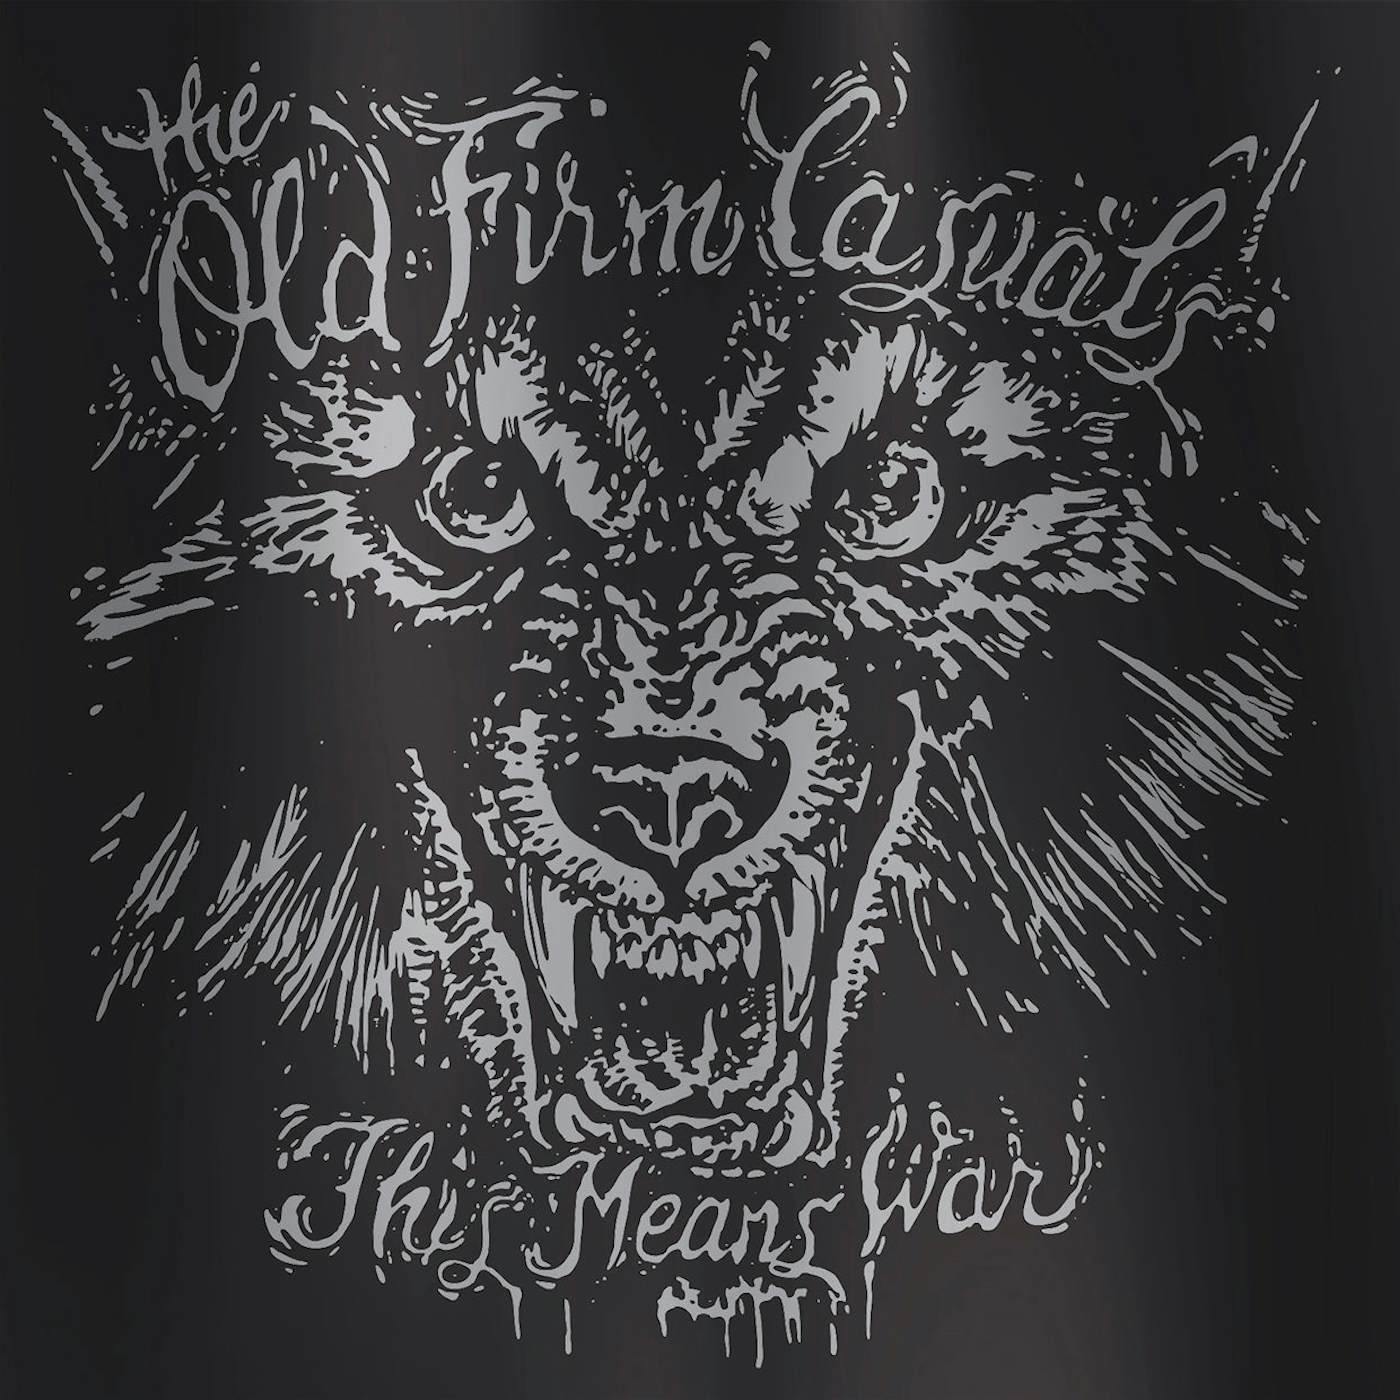 The Old Firm Casuals LP - This Means War (Re-Issue) (Wolf Edition Silver Vinyl)